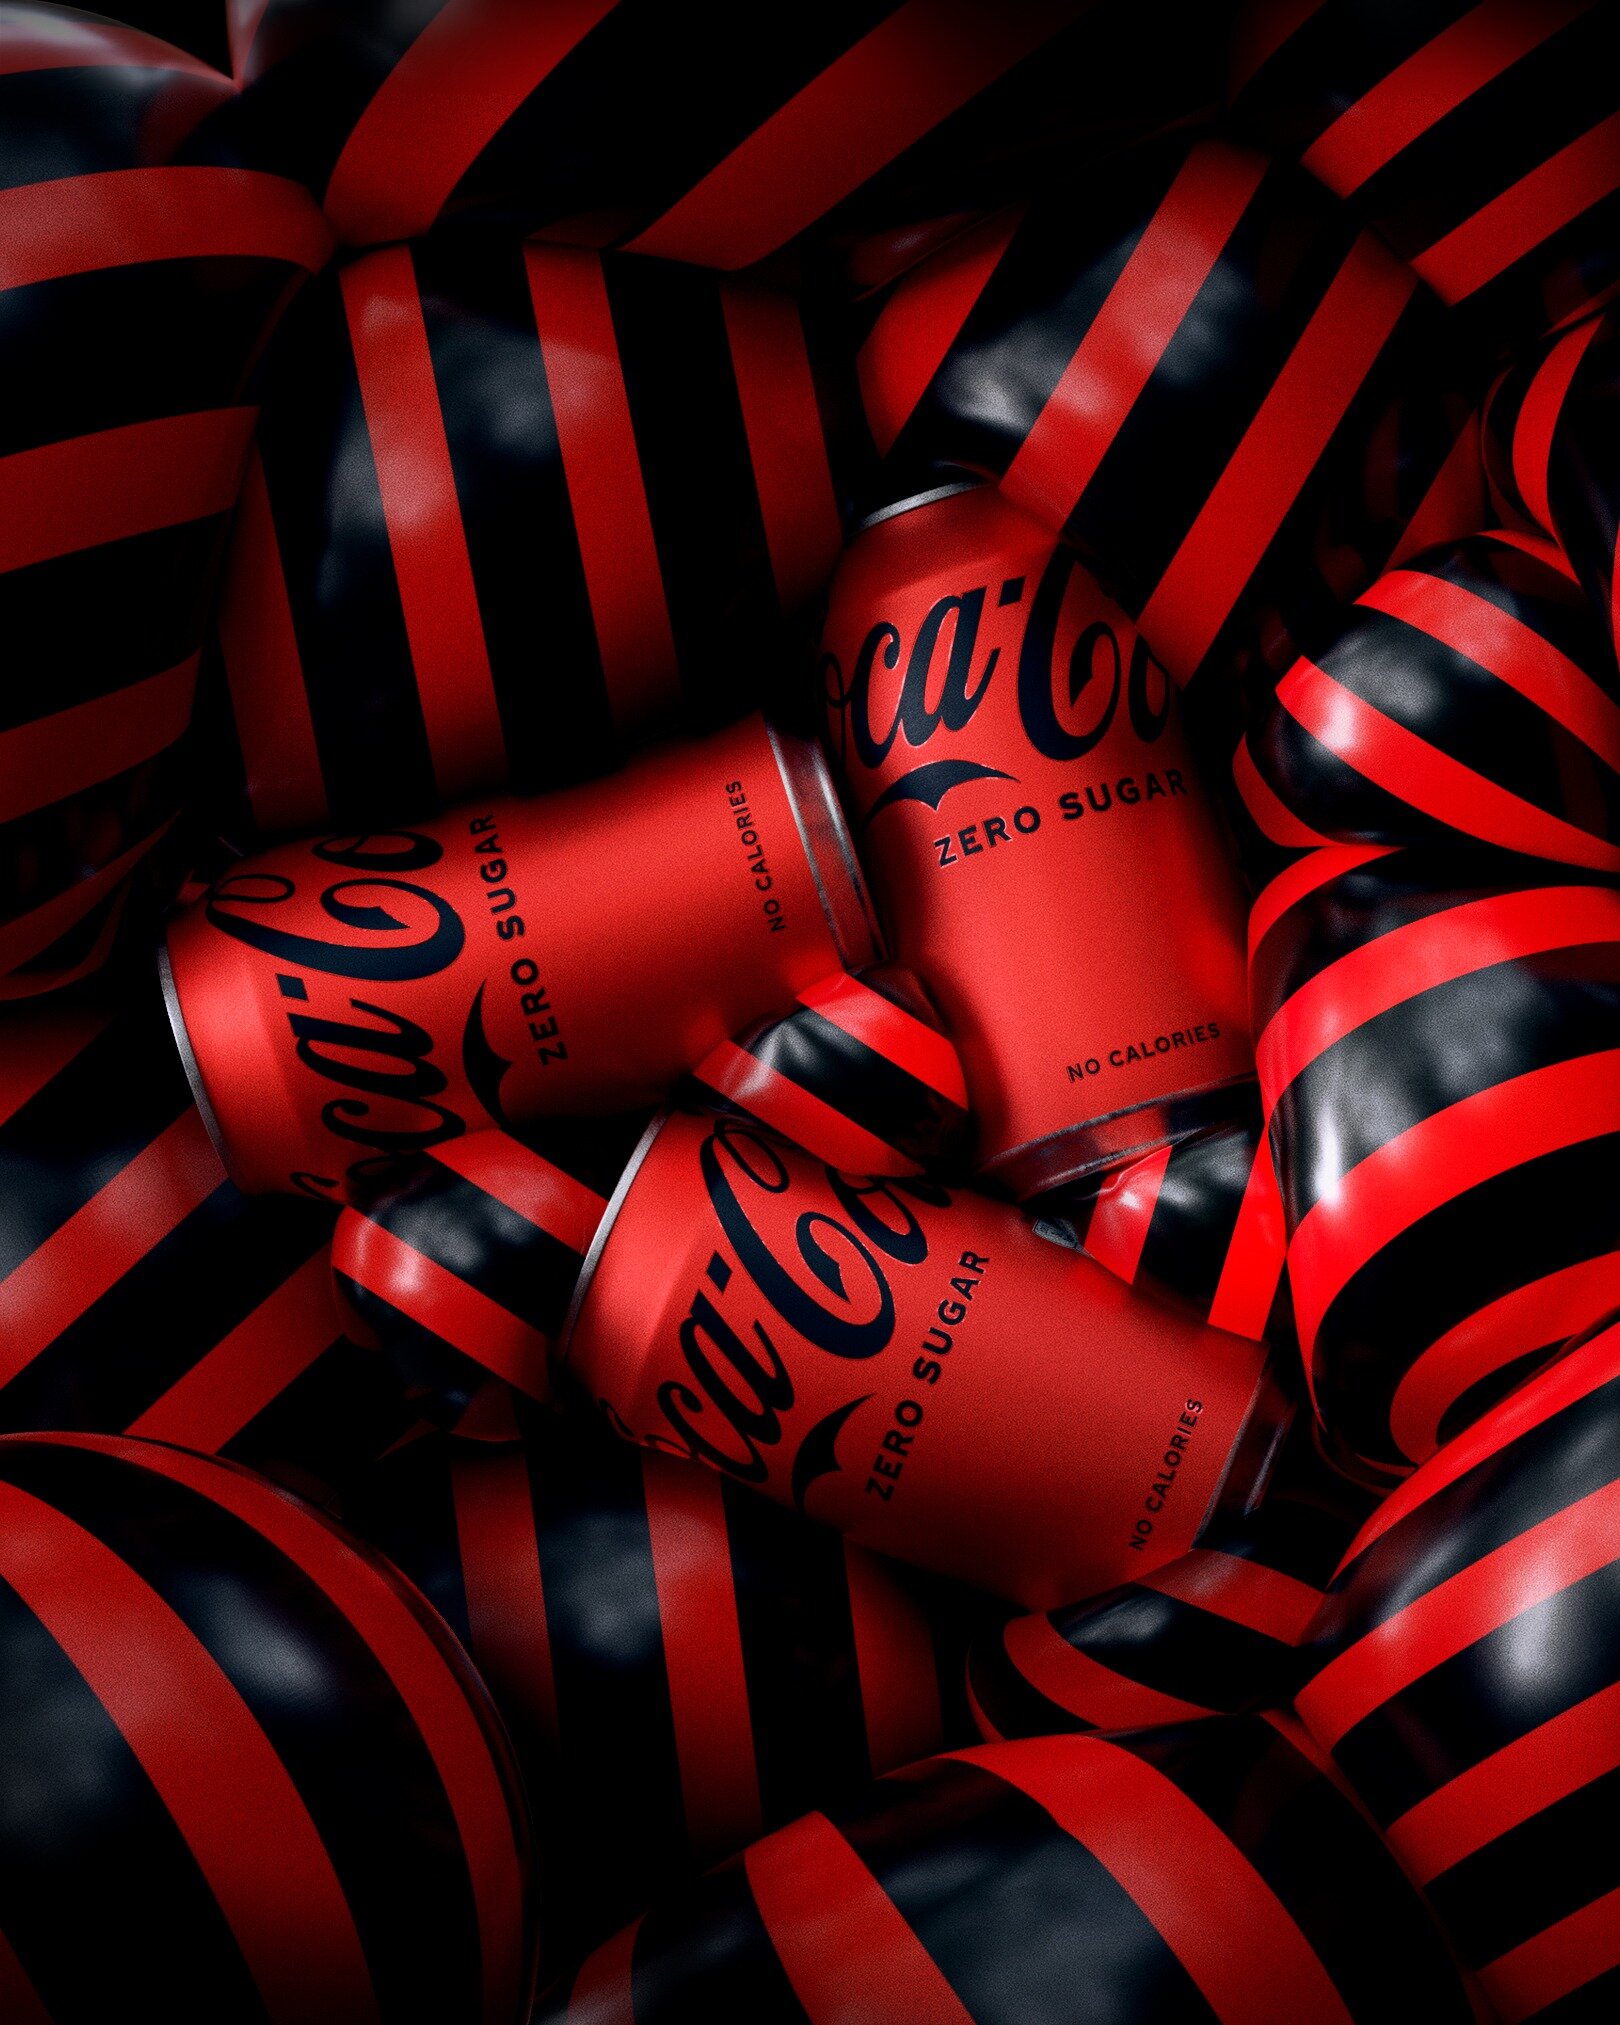 3D Product visualization BTS 🔴⚫- as seen in our newest 3D OOH campaign for @cocacoladk 

#3dvisualization #3dproductdesign #render3d #cocacolazero @wavemakerdanmark WPP @wpp Wavemaker @cocacola #outofhome #bts